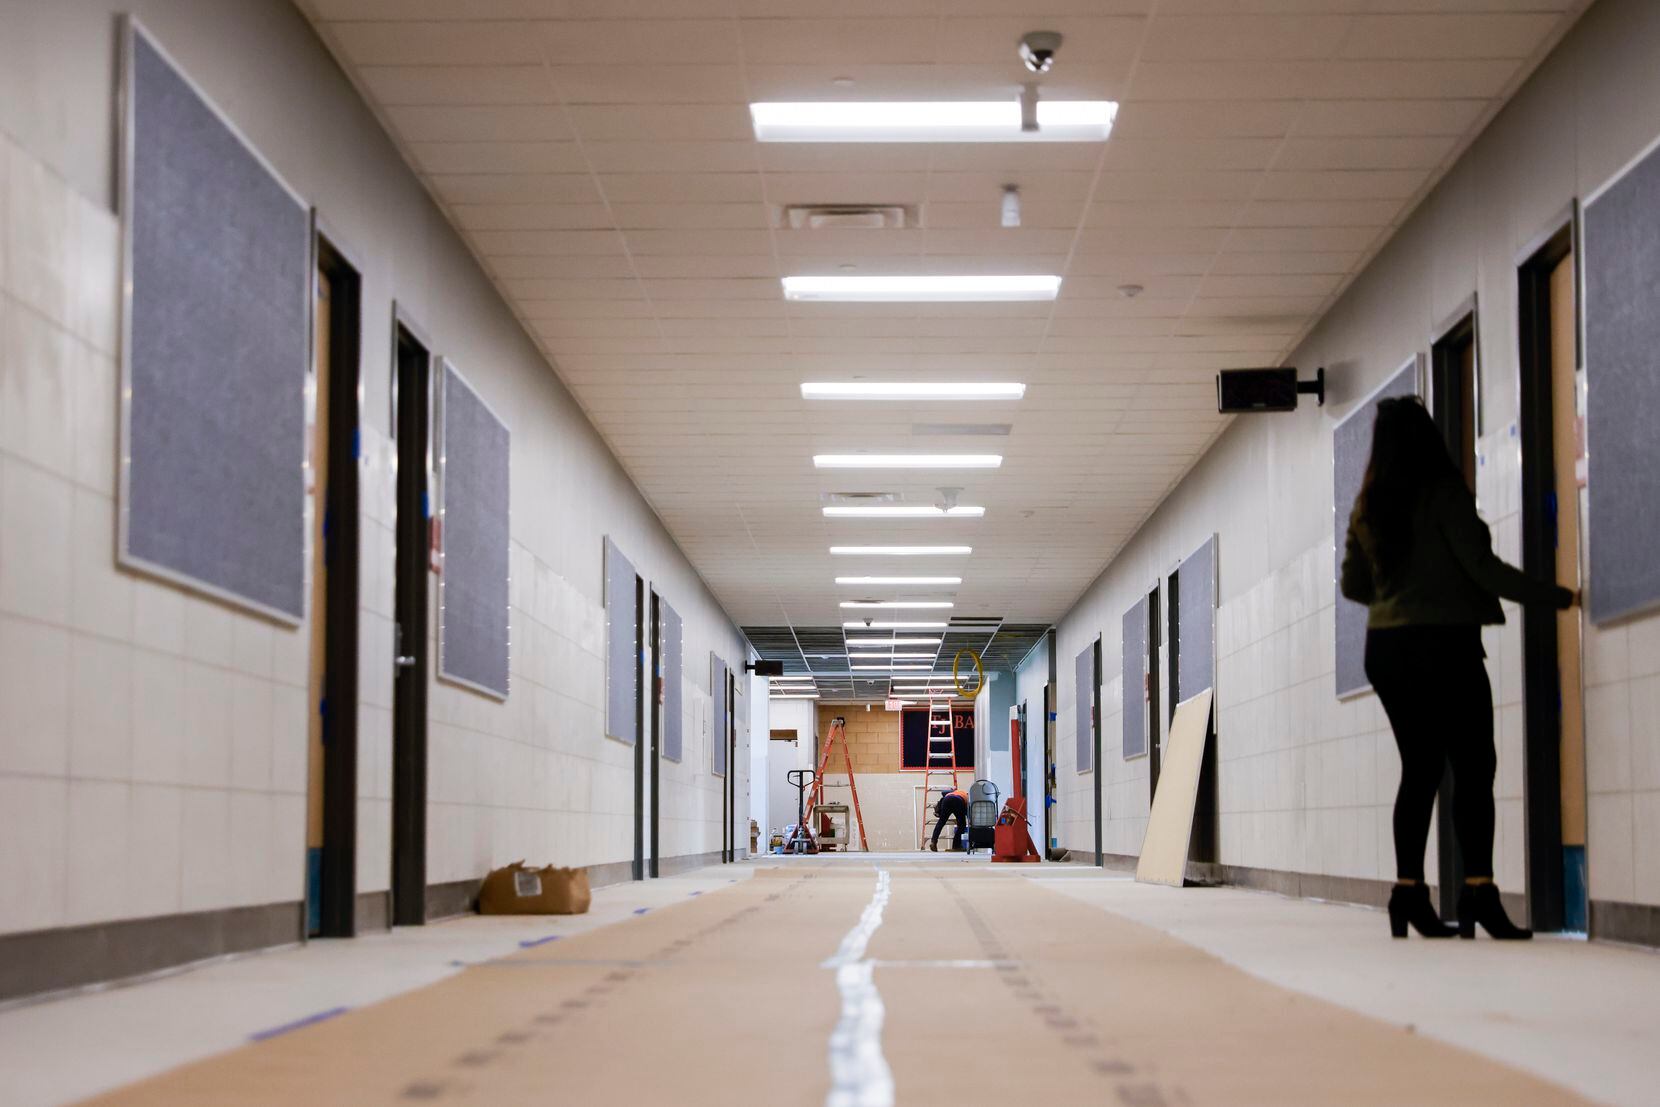 A look at the new Thomas Jefferson High School in the West